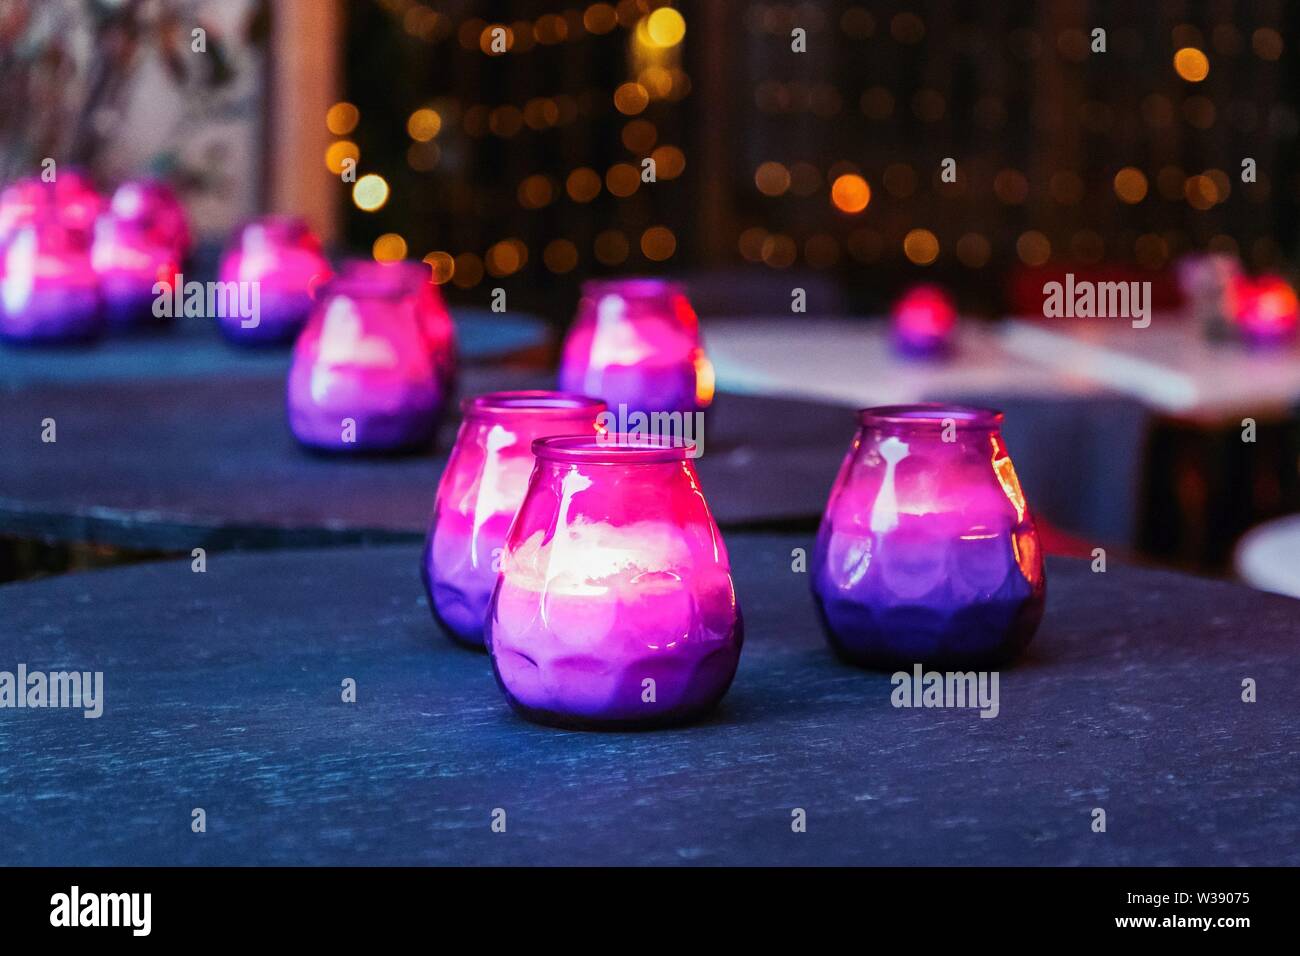 Burning purple and pink candles on the table. Hygge concept Stock Photo